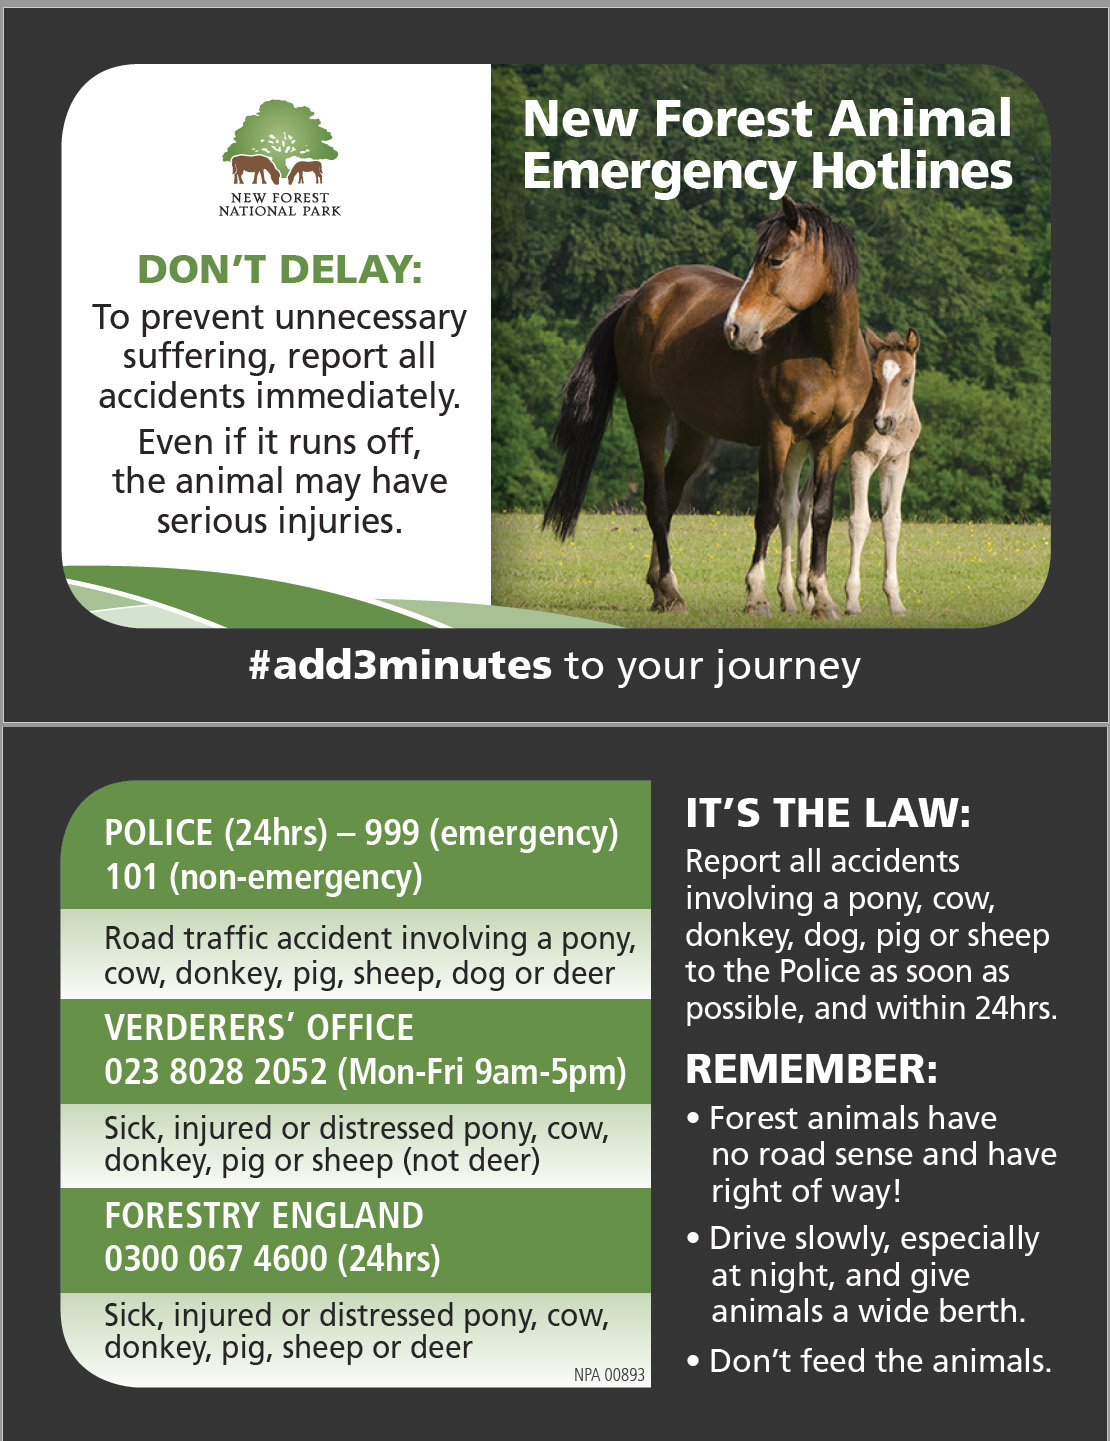 Reporting Sick or Injured Animals & Traffic Incidents in the New Forest